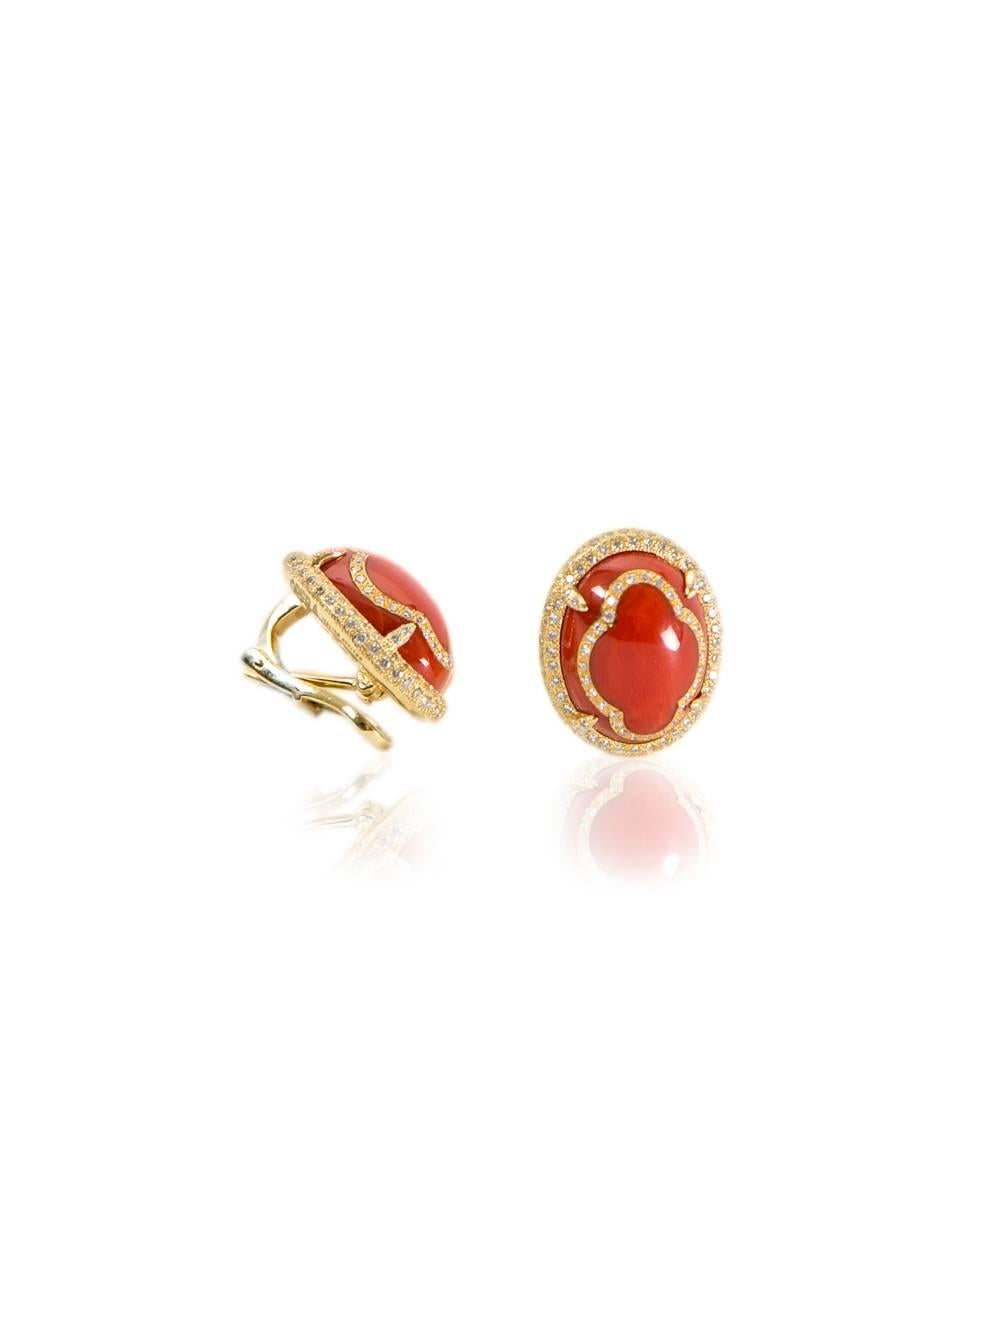 18kt yellow gold earrings with coral and white diamonds ct. 1,06.

Handmade in Italy

Made-to-order production time: 4 weeks
